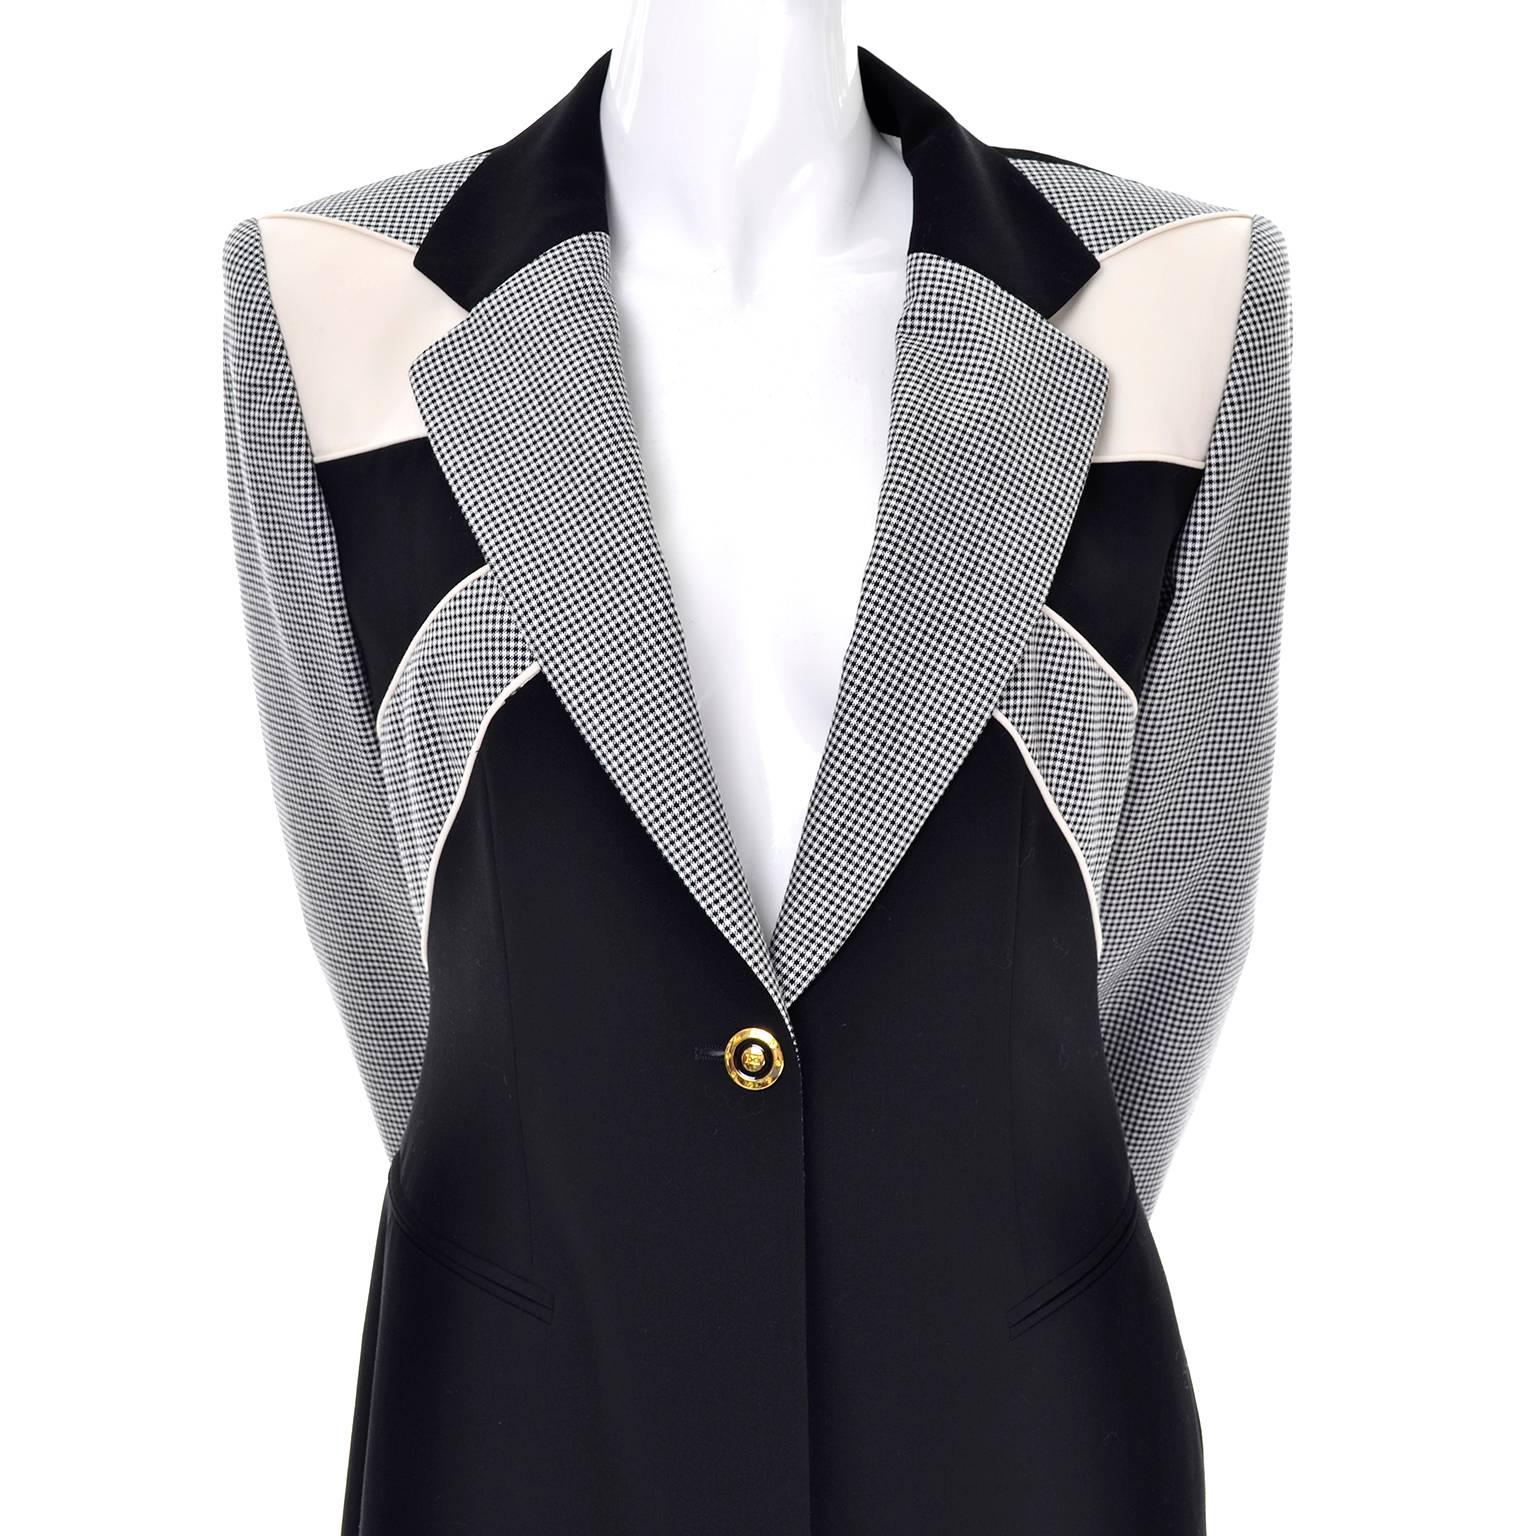 This is an exceptional black and white checked blazer from Escada designed by Margaretha Ley. This vintage long blazer features a radial design of alternating solid black, solid cream, and black and white checked, with checked sleeves and black from